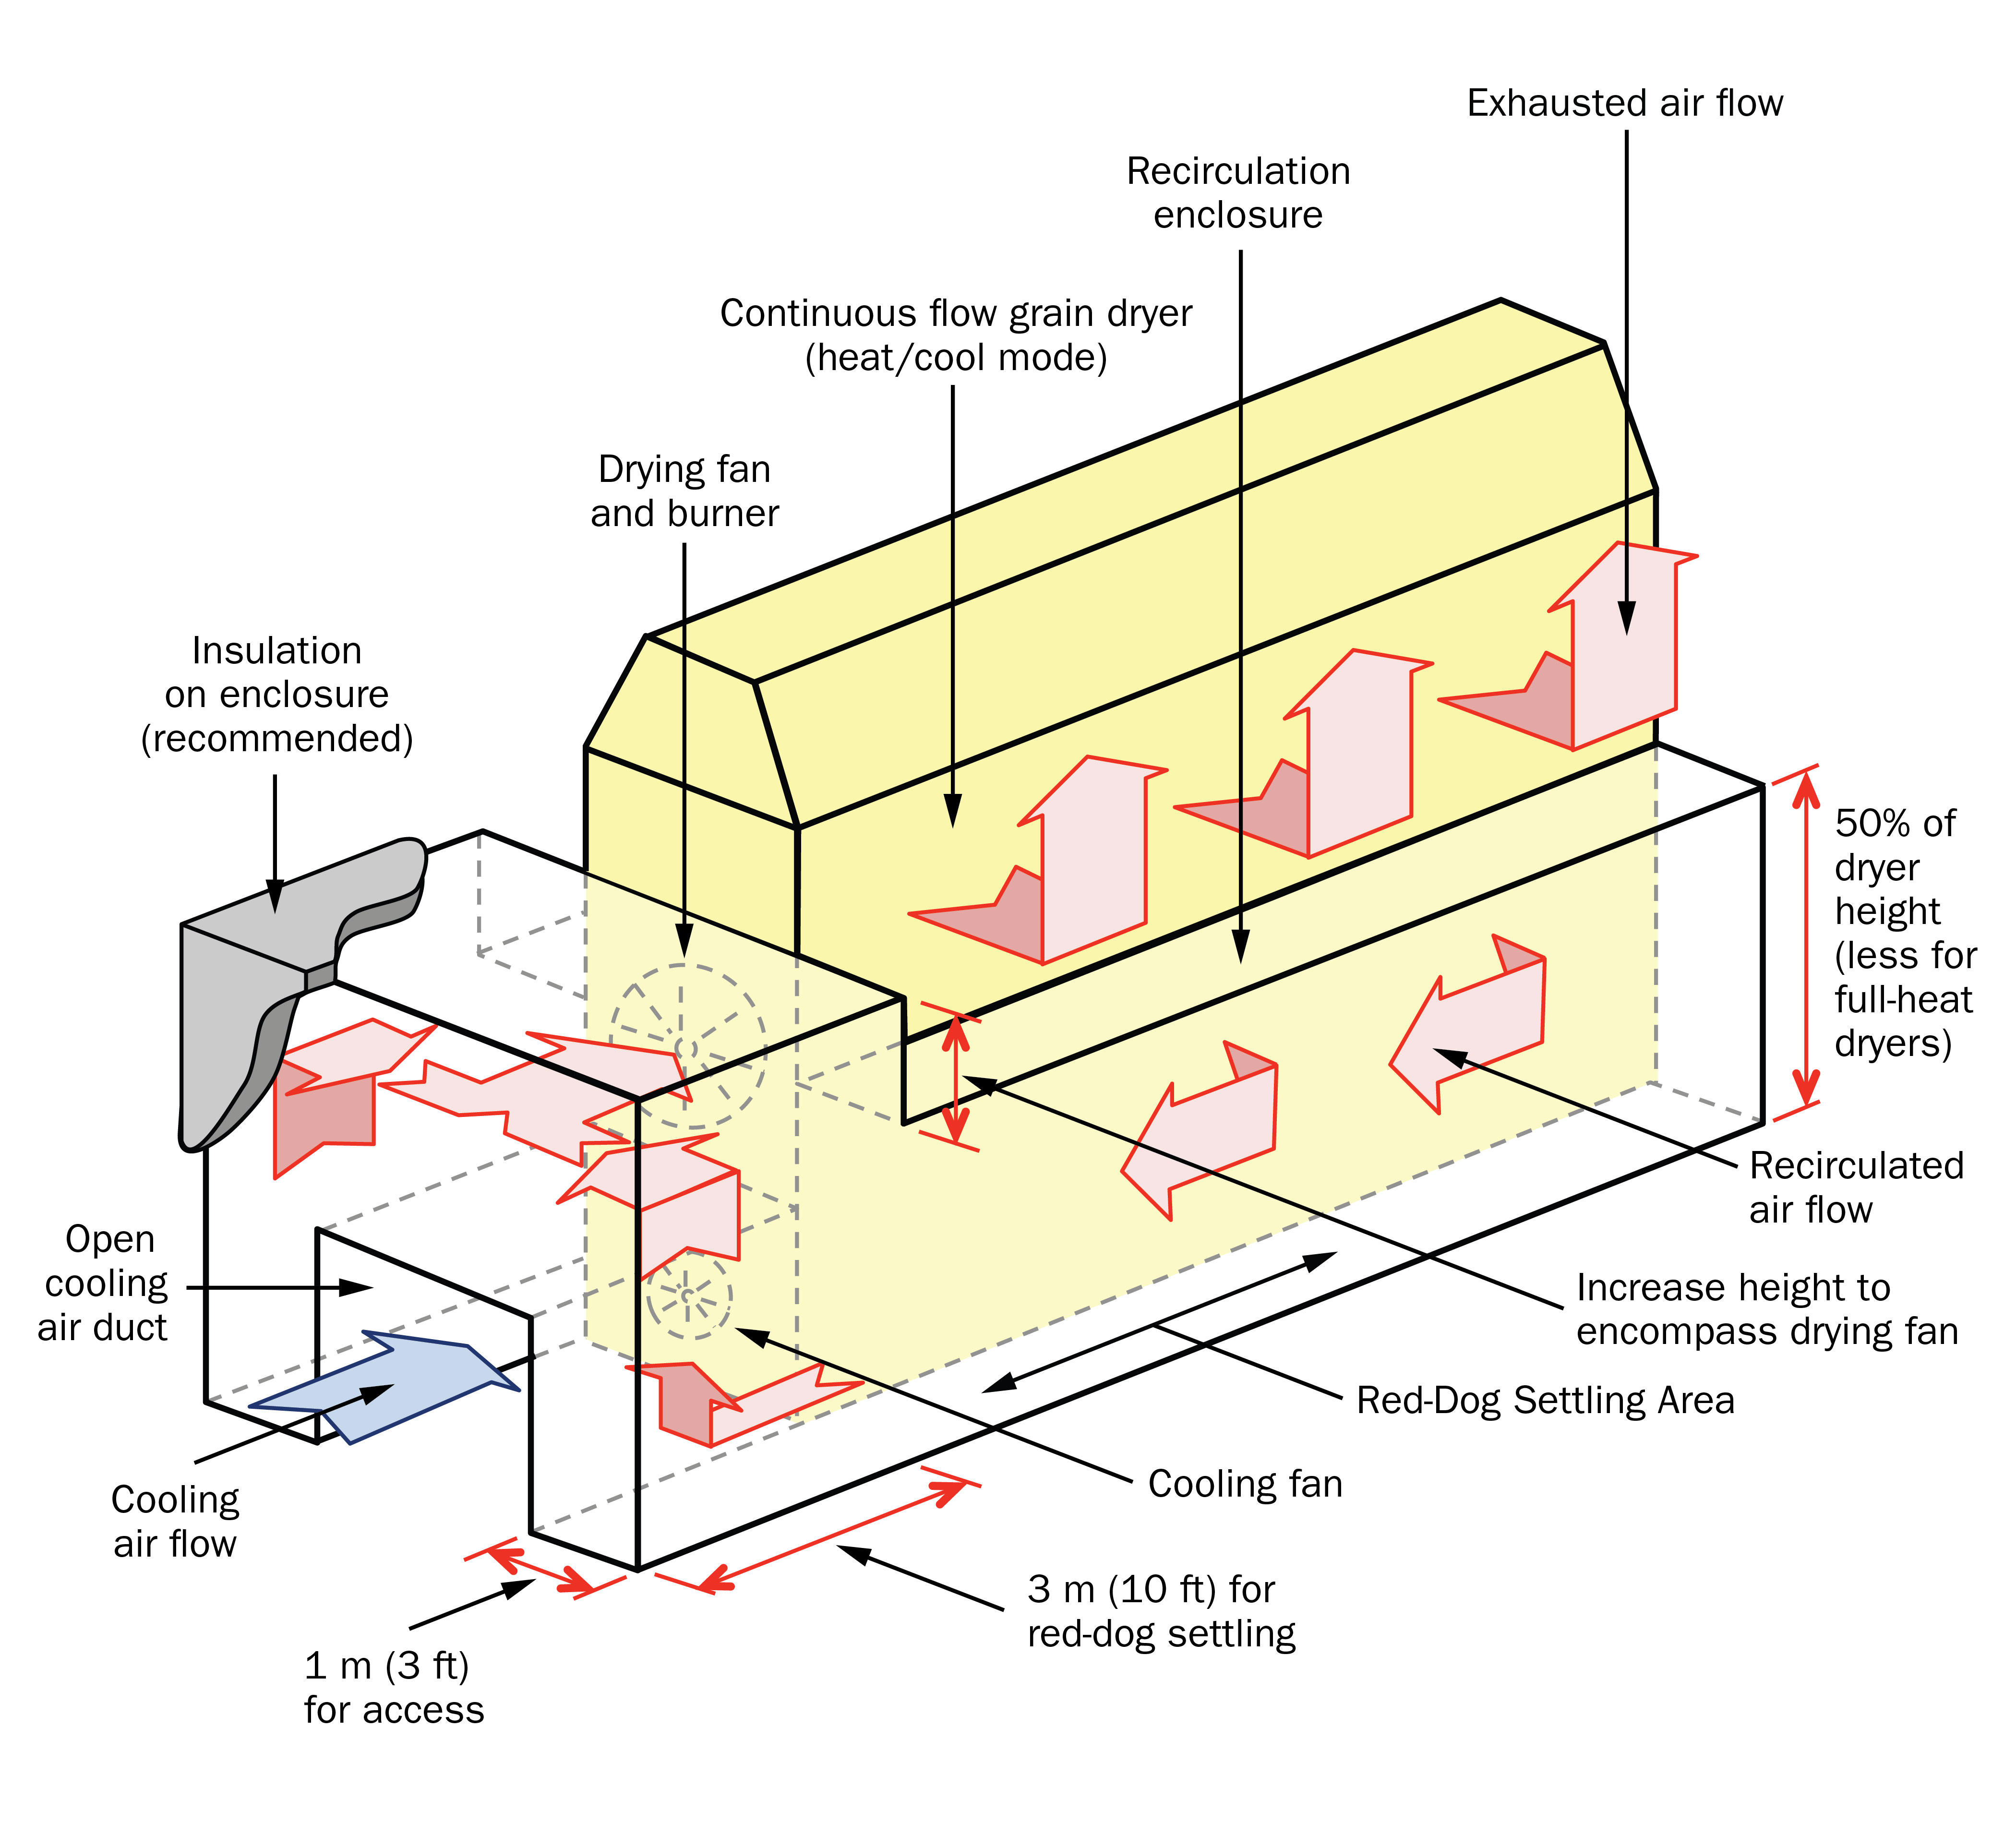 Diagram of a heat recirculation system added to a conventional horizontal continuous-flow grain dryer